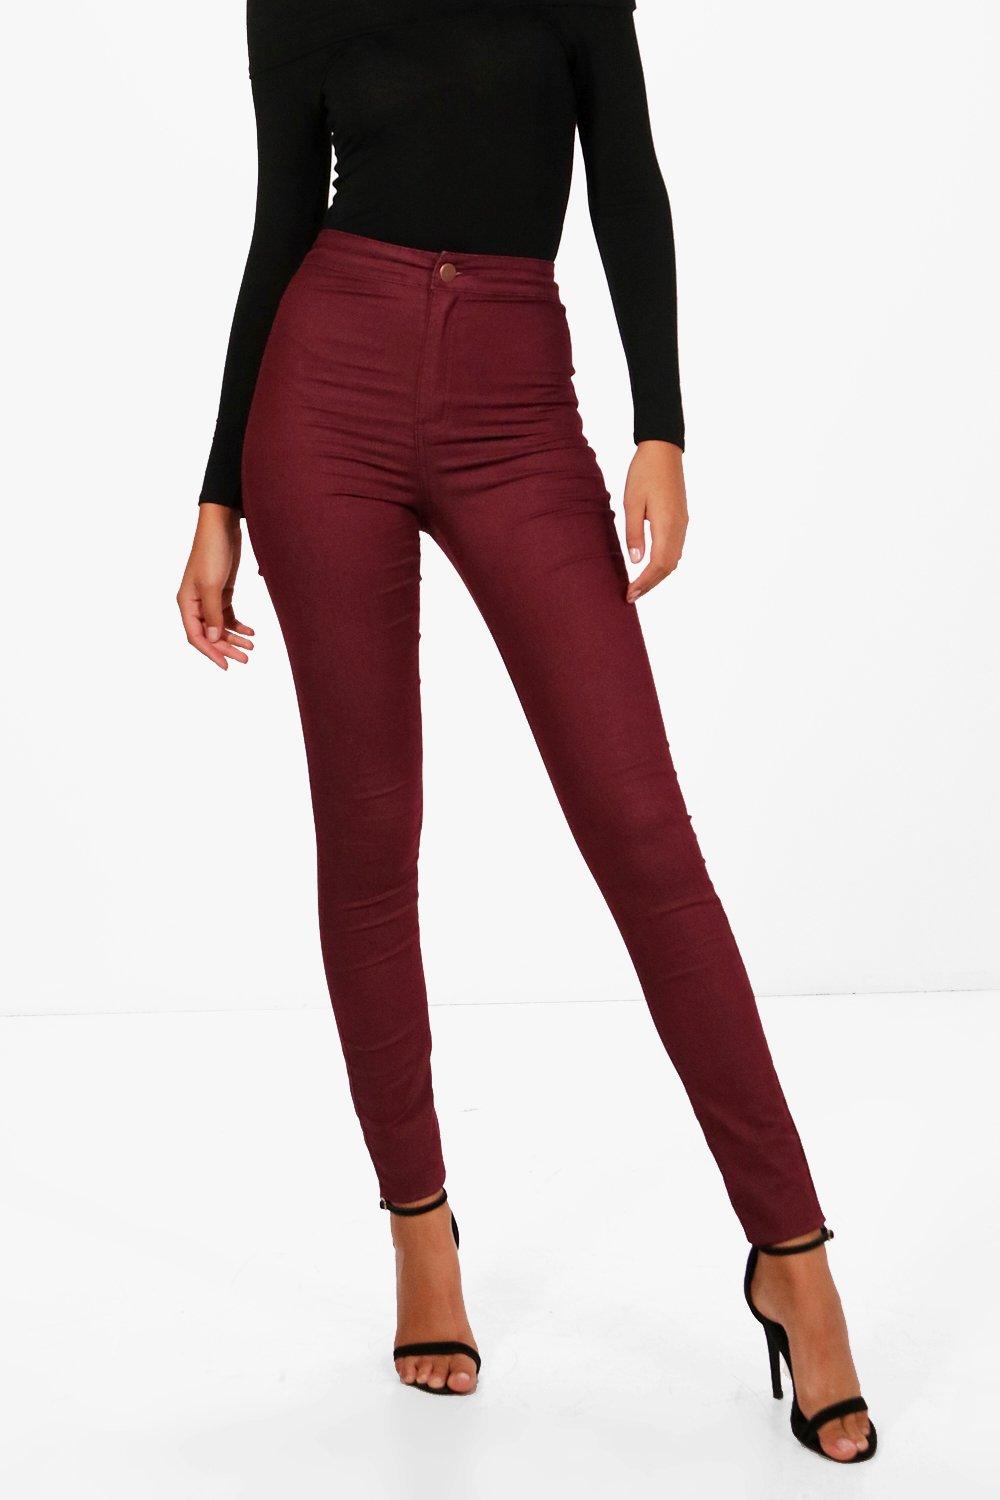 maroon high waisted jeans